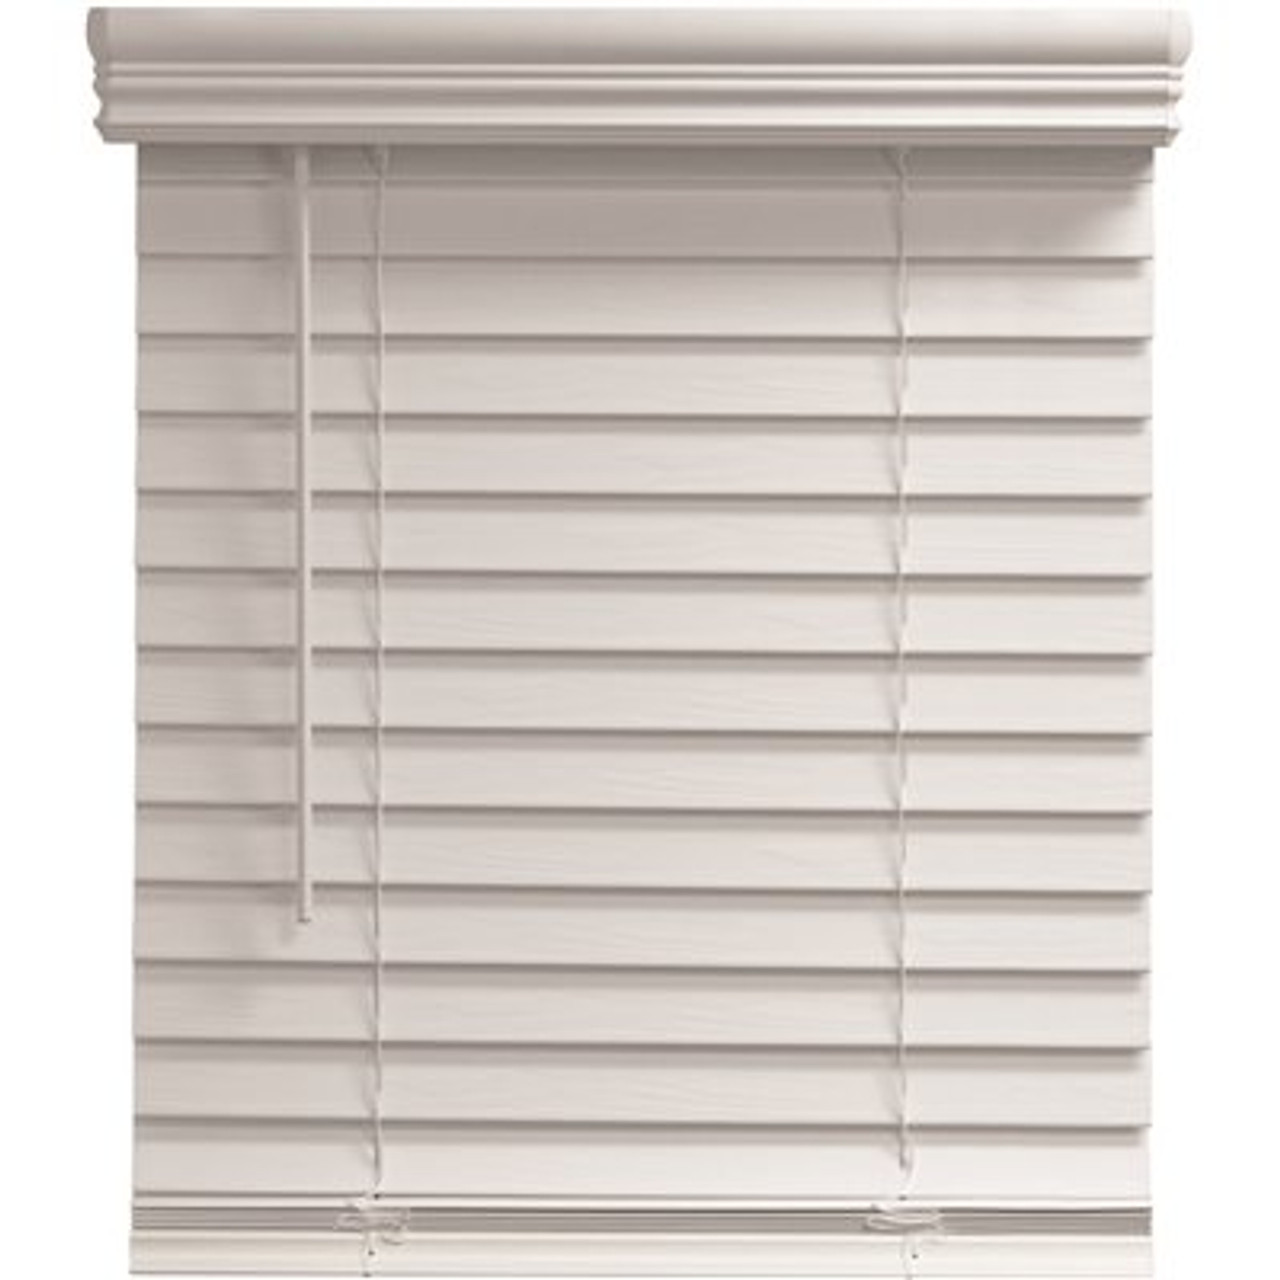 Champion Pre-Cut 30 in. W x 60 in. L White Cordless Room Darkening Faux Wood Blinds with 2 in. Slats